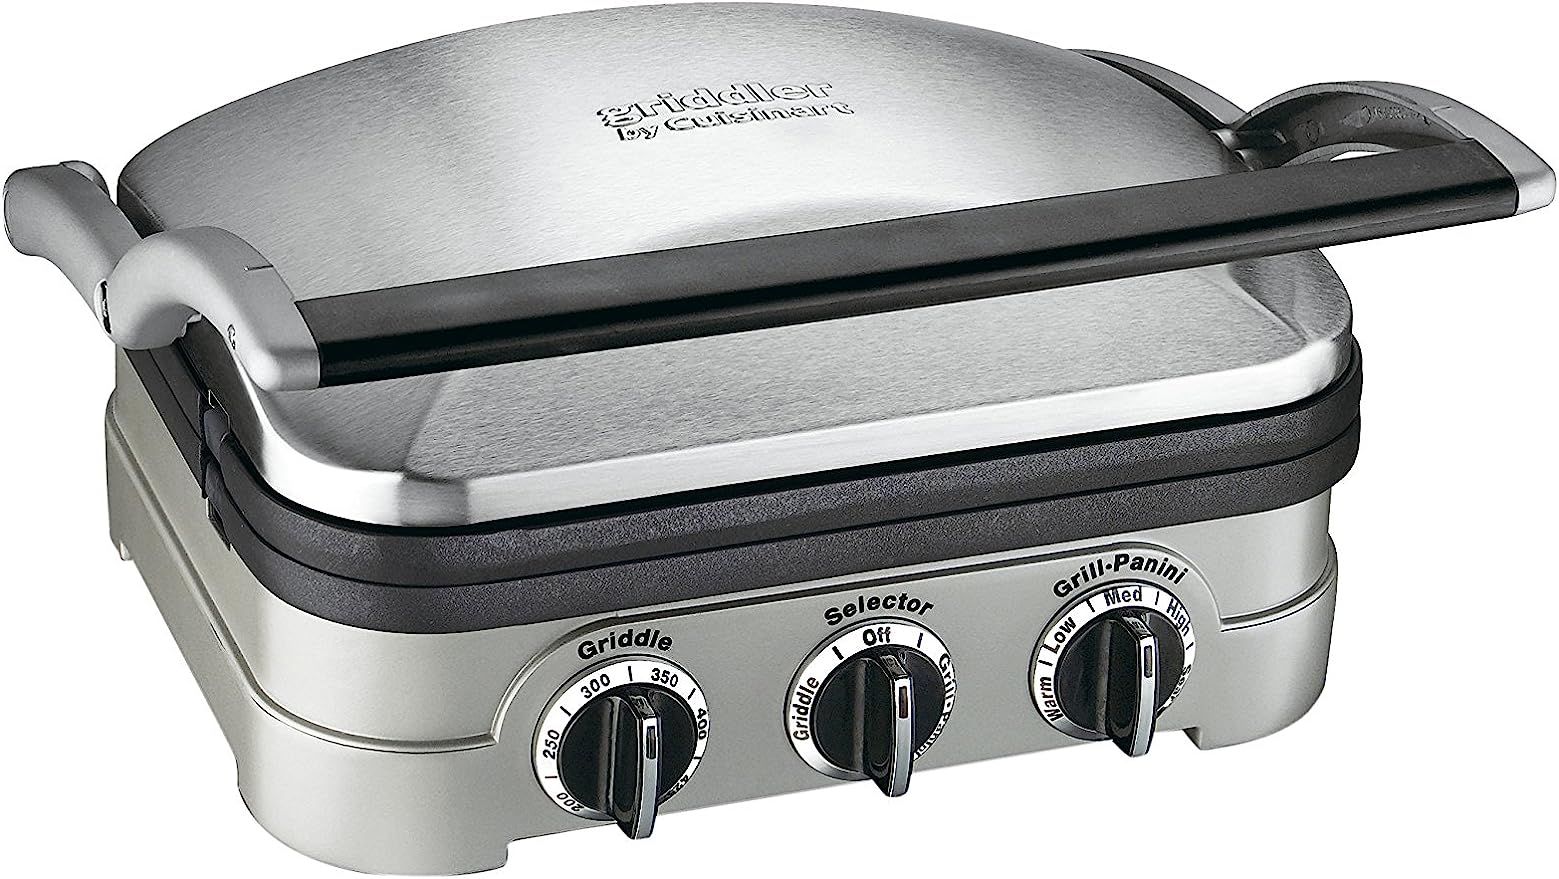 Cuisinart GR-4NP1 5-in-1 Griddler, 13.5"(L) x 11.5"(W) x 7.12"(H), Silver With Silver/Black Dials | Amazon (US)